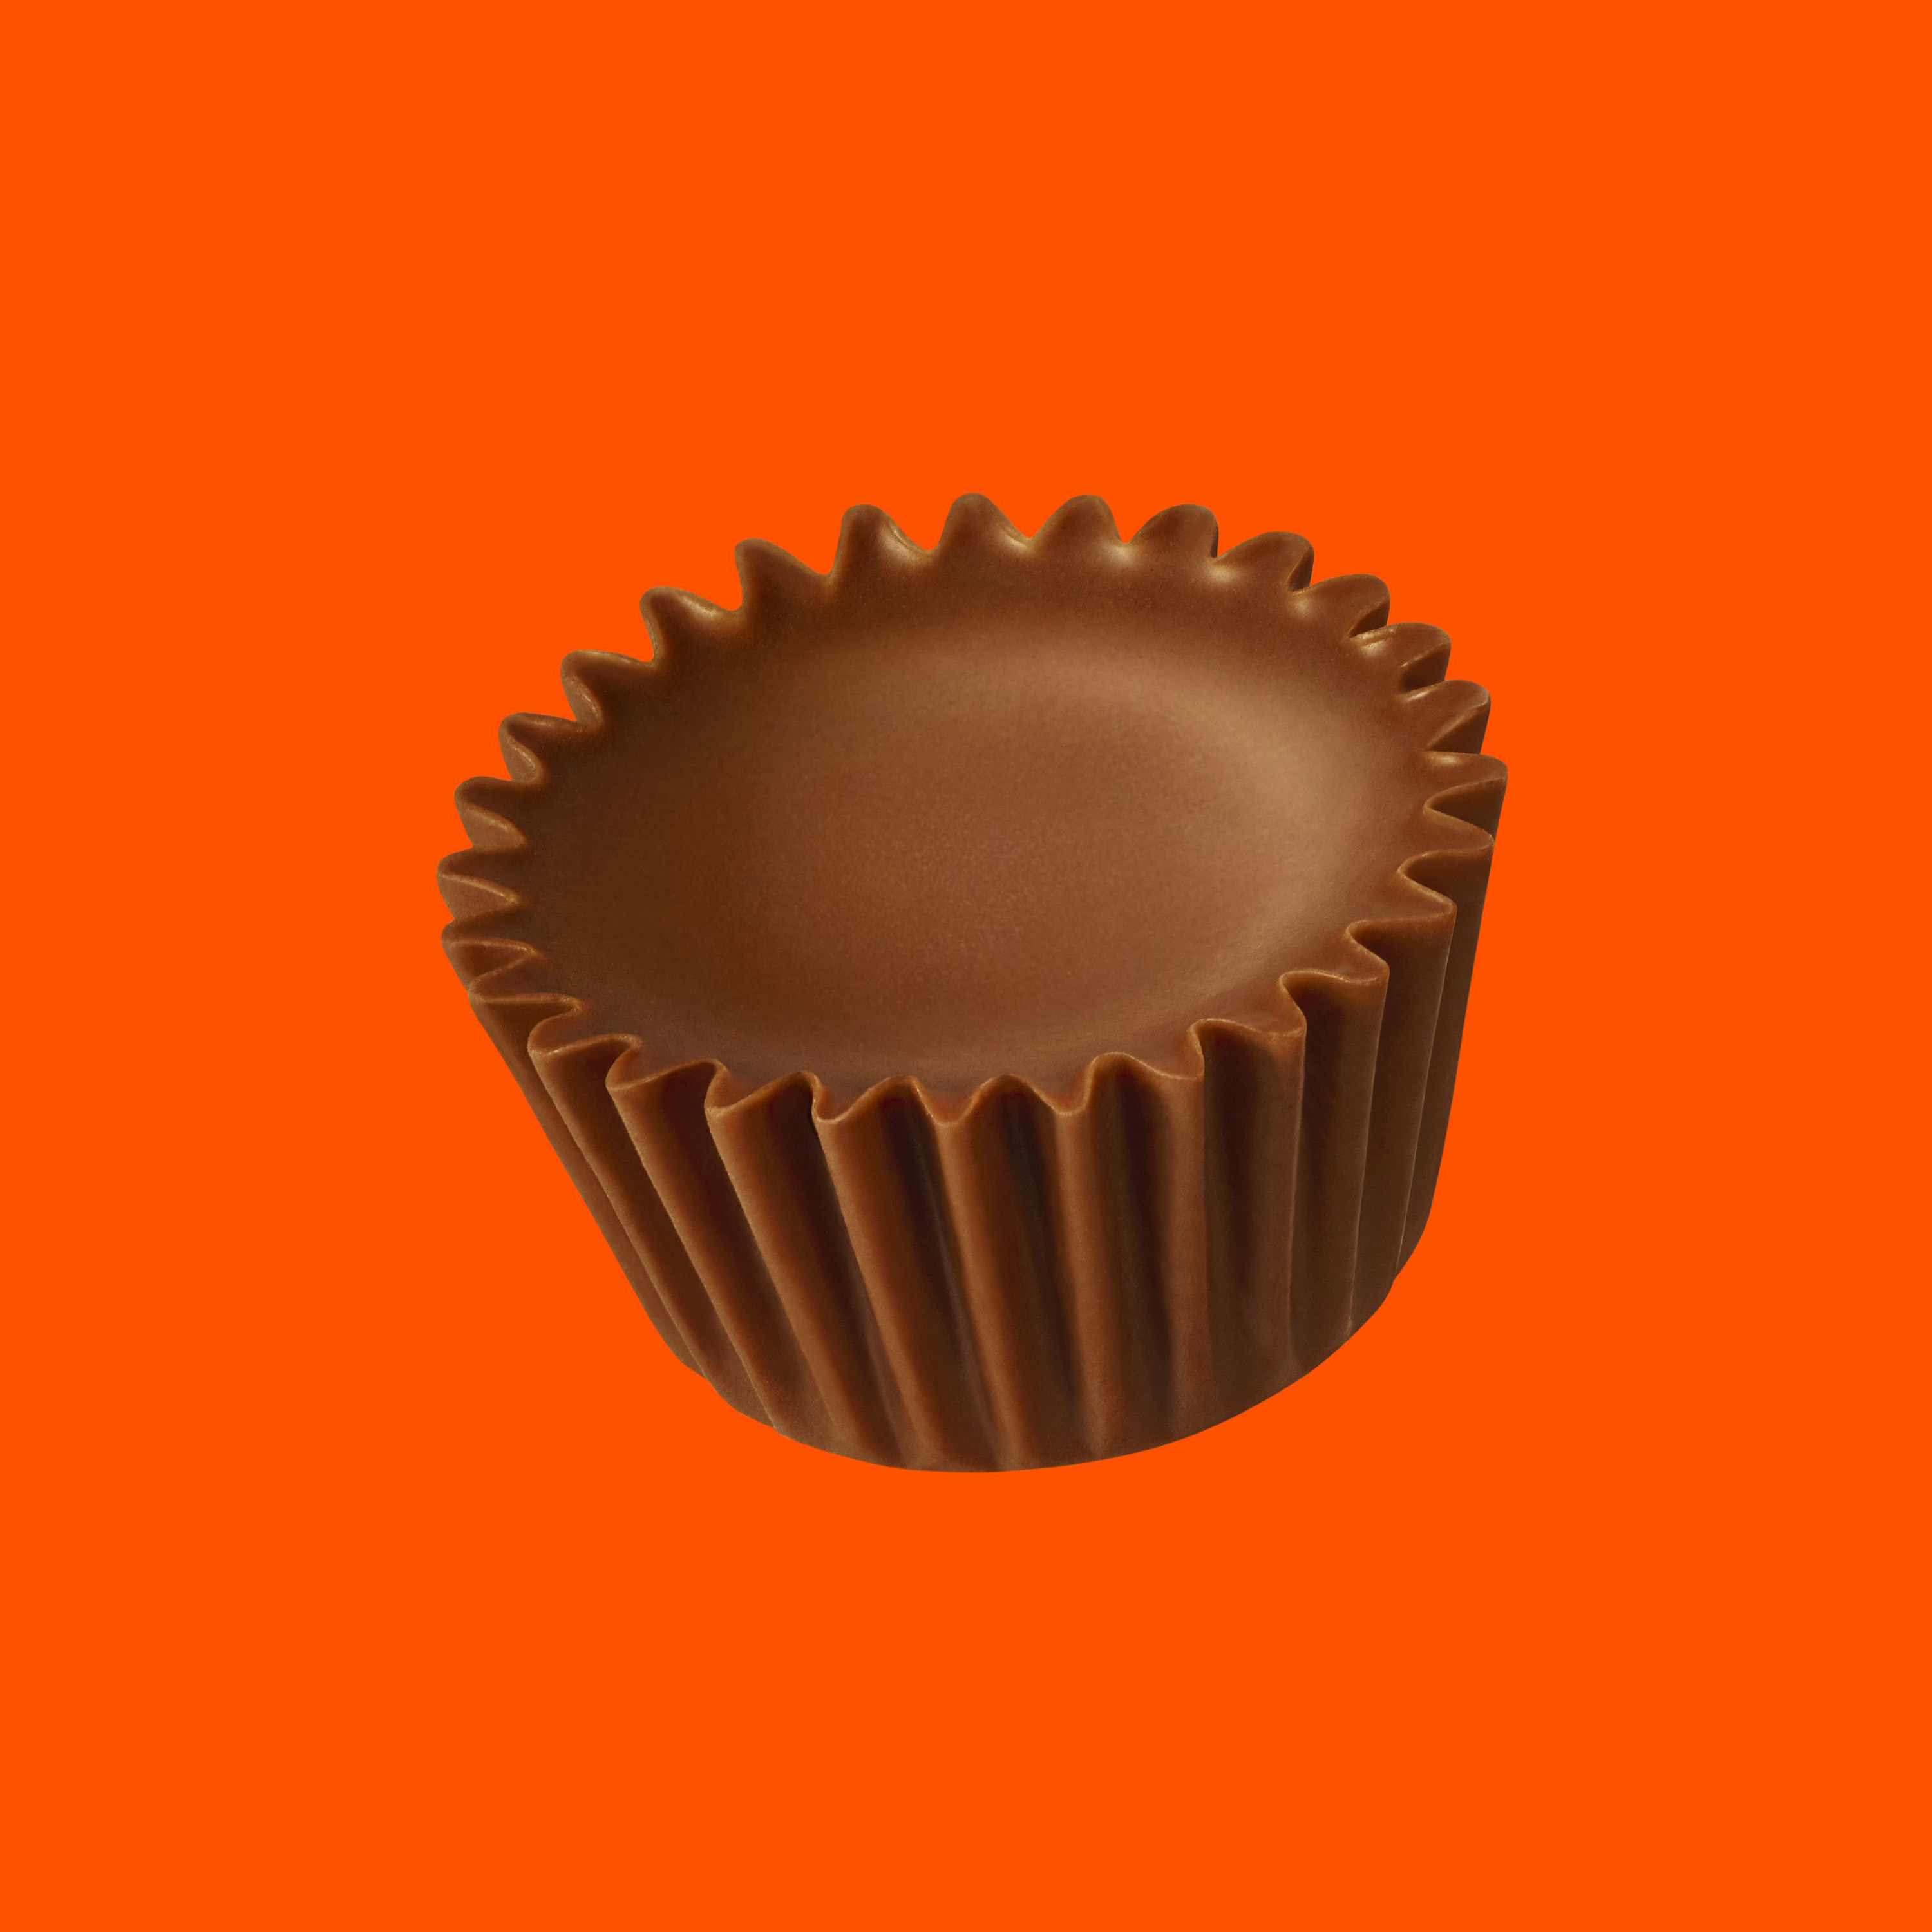 Reese's Miniatures Holiday Milk Chocolate Peanut Butter Filled Cane Candy, 2.79 Oz. - image 3 of 6